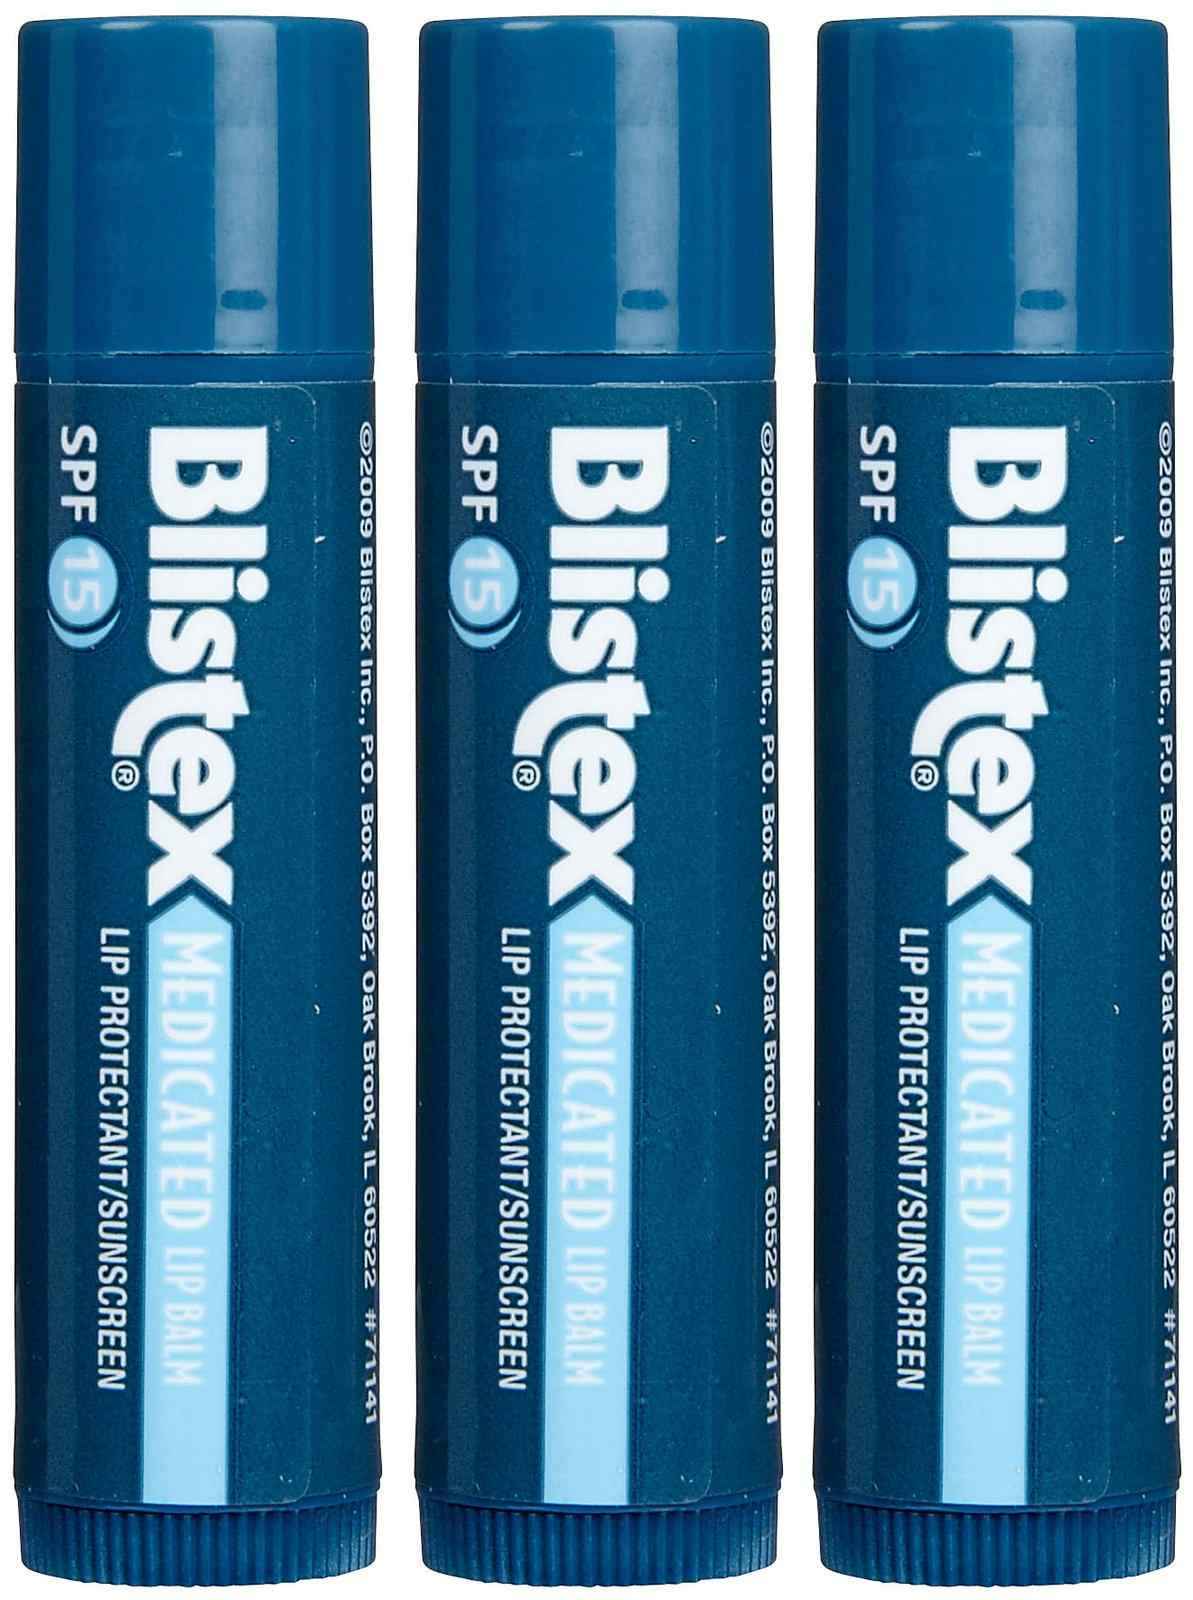 Blistex Medicated Lip Balm Lip Protectant with Sunscreen